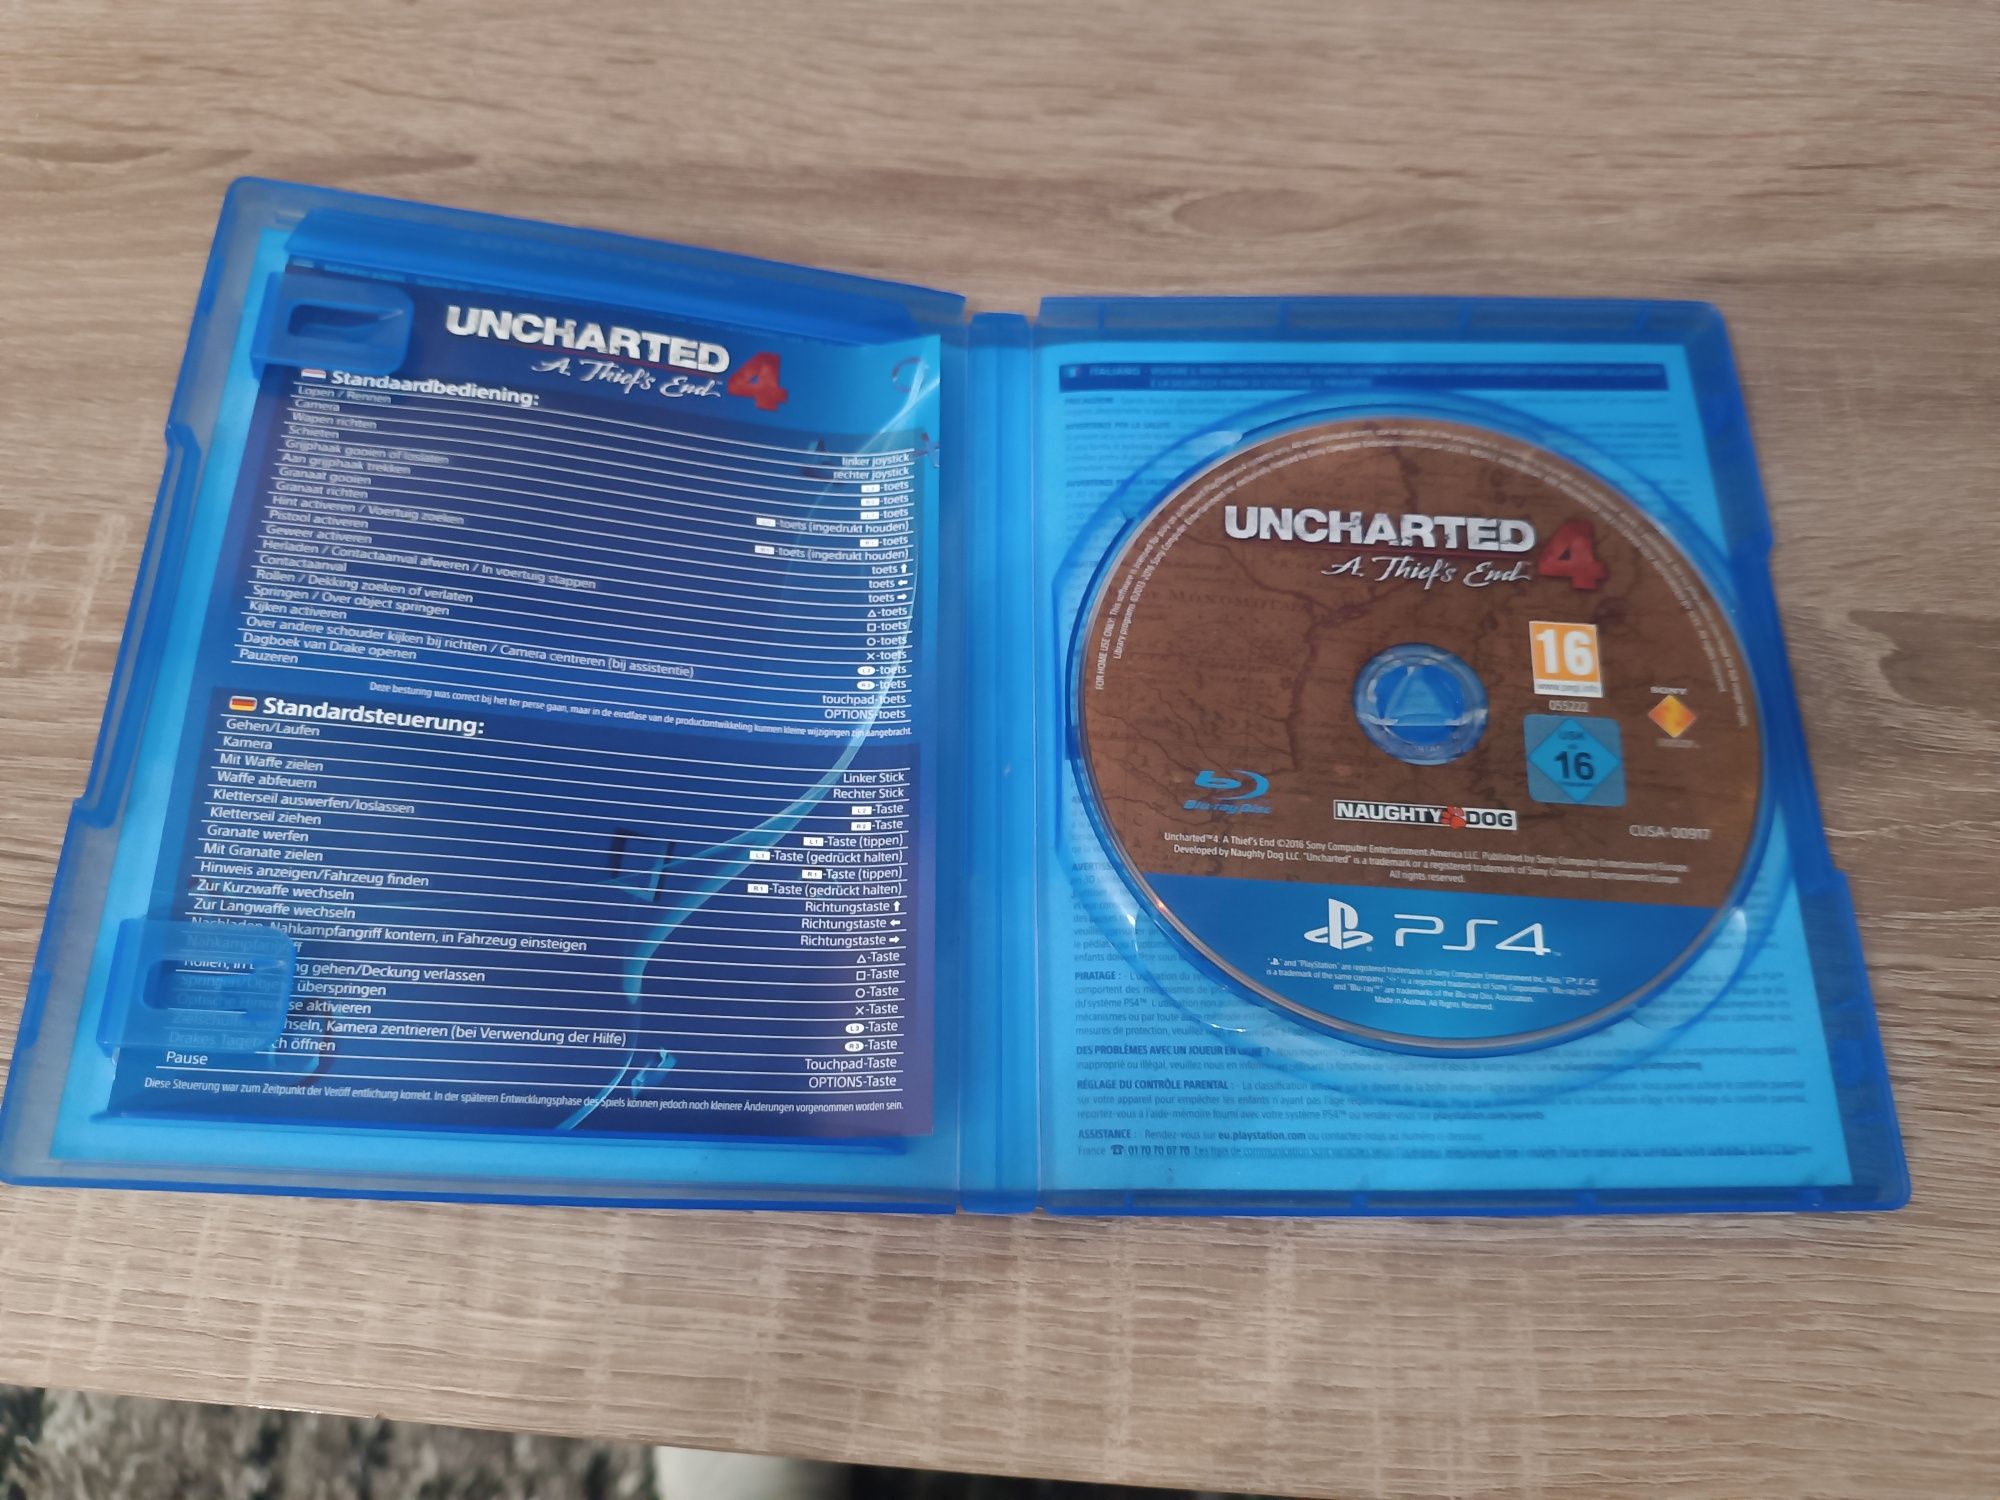 гра uncharted 4 ps 4pro